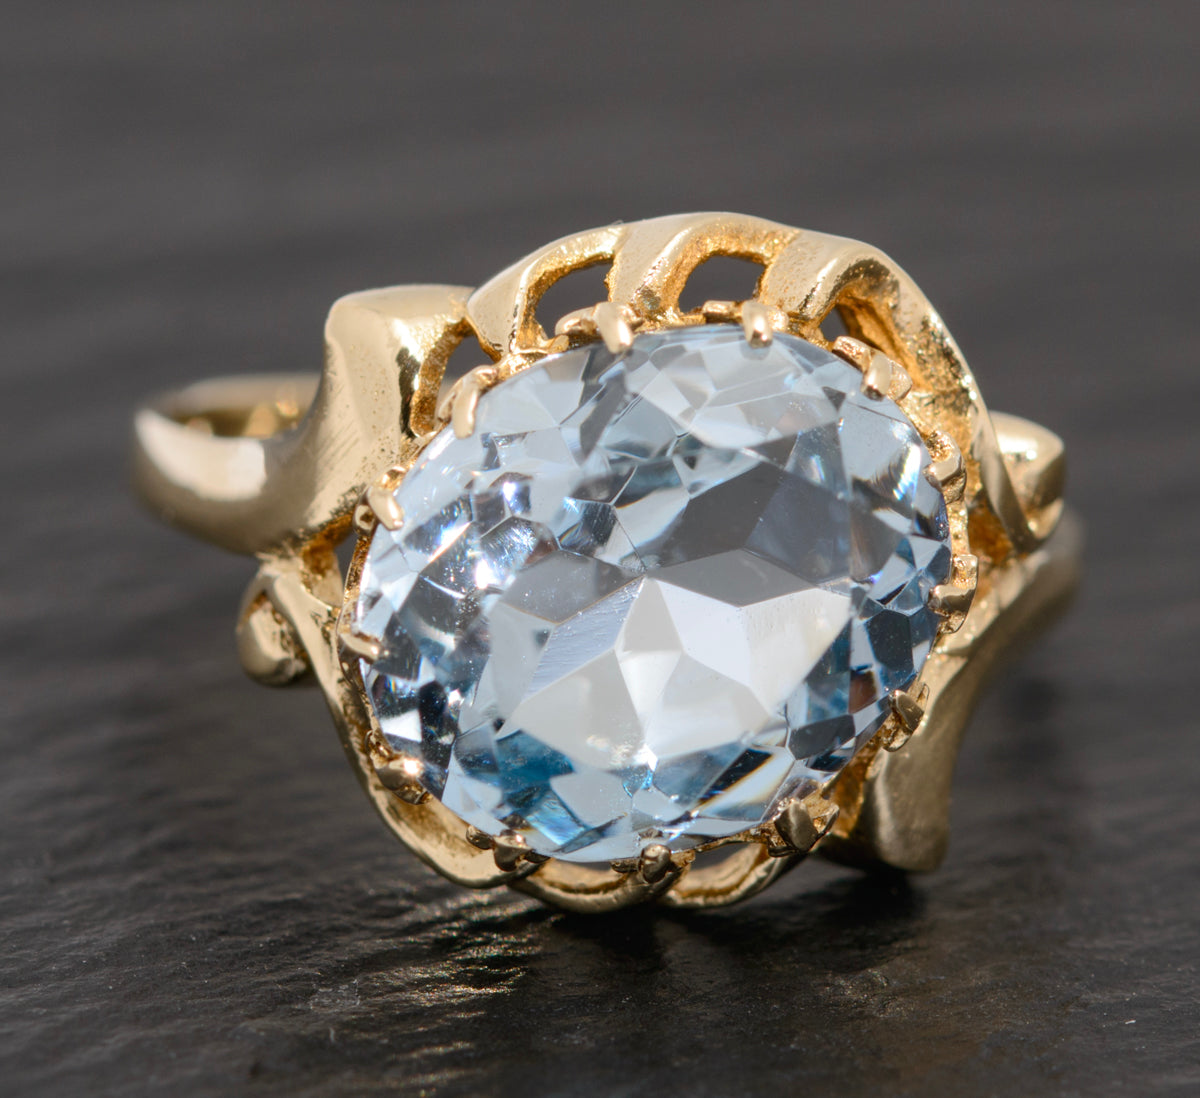 Vintage 9ct Gold Ring With  5 Carat Blue Spinel Gemstone (A1614)